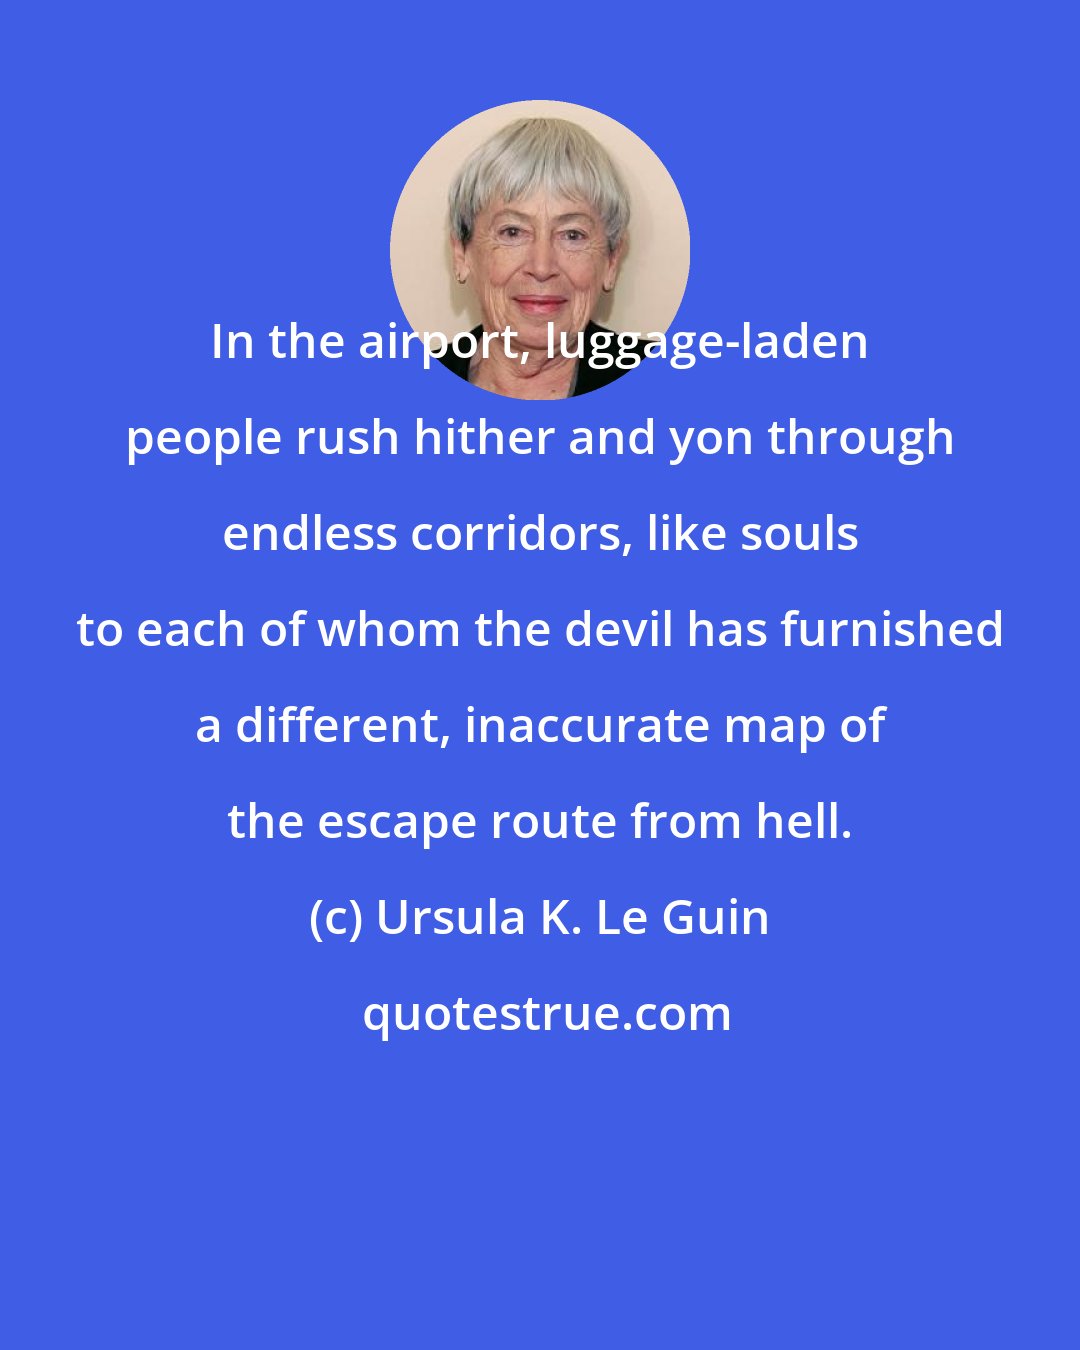 Ursula K. Le Guin: In the airport, luggage-laden people rush hither and yon through endless corridors, like souls to each of whom the devil has furnished a different, inaccurate map of the escape route from hell.